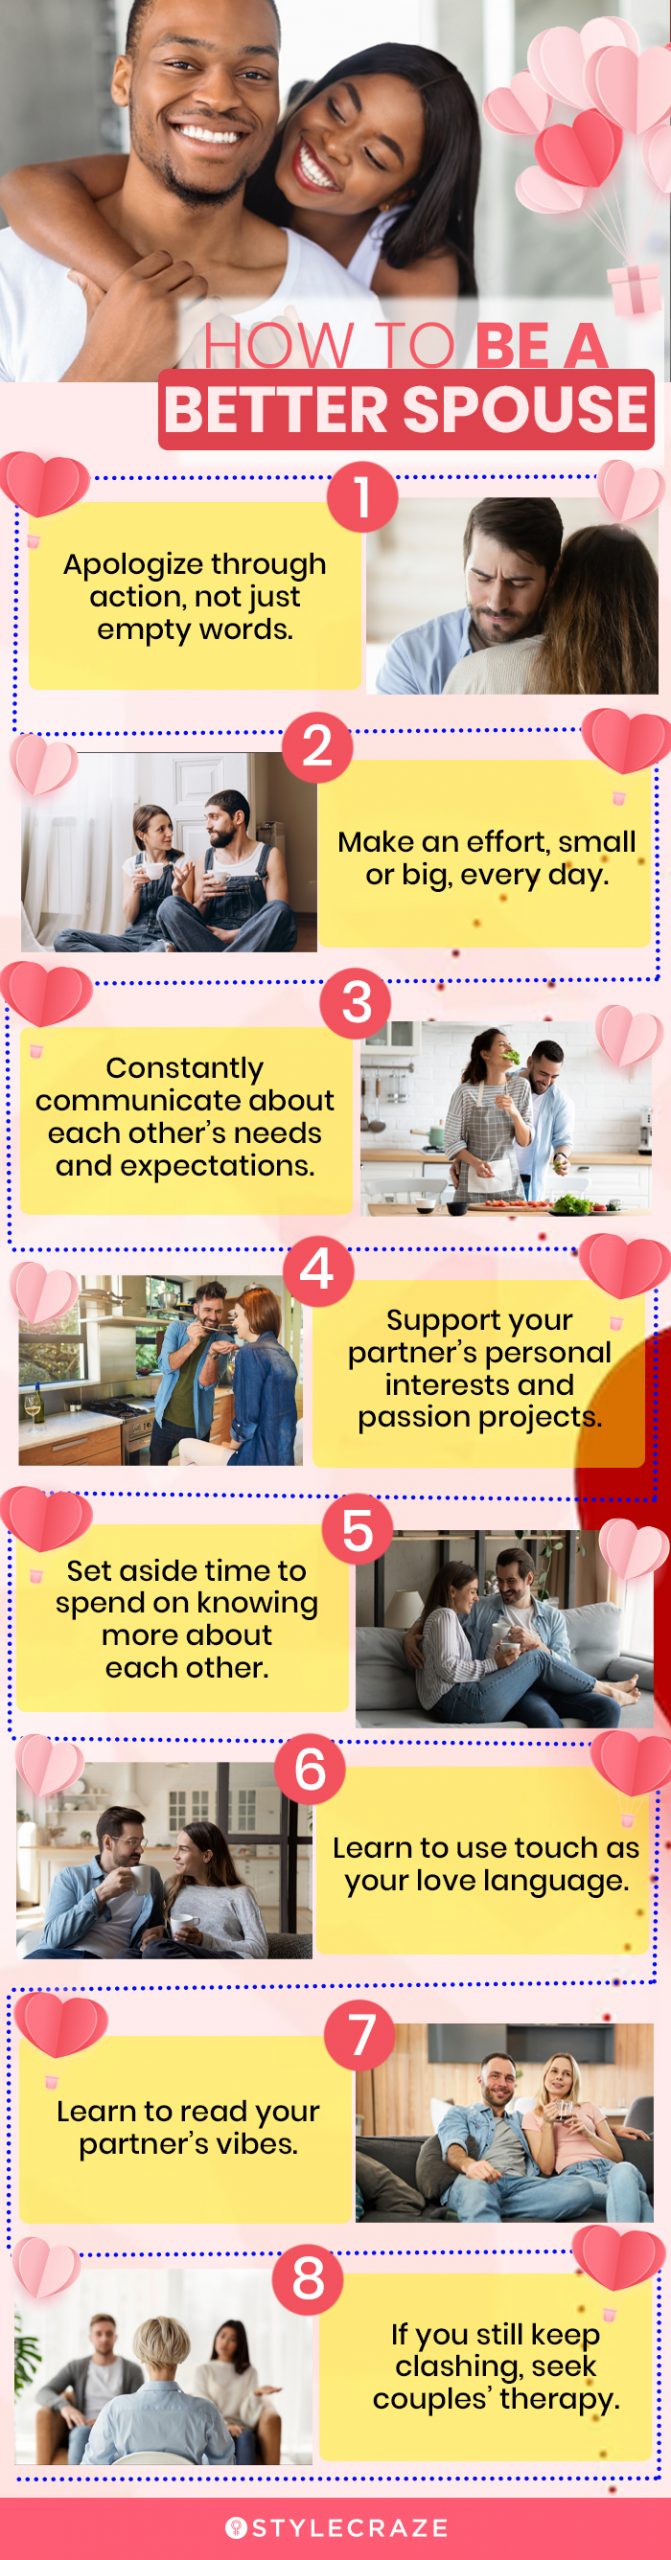 how to be a better spouse (infographic)